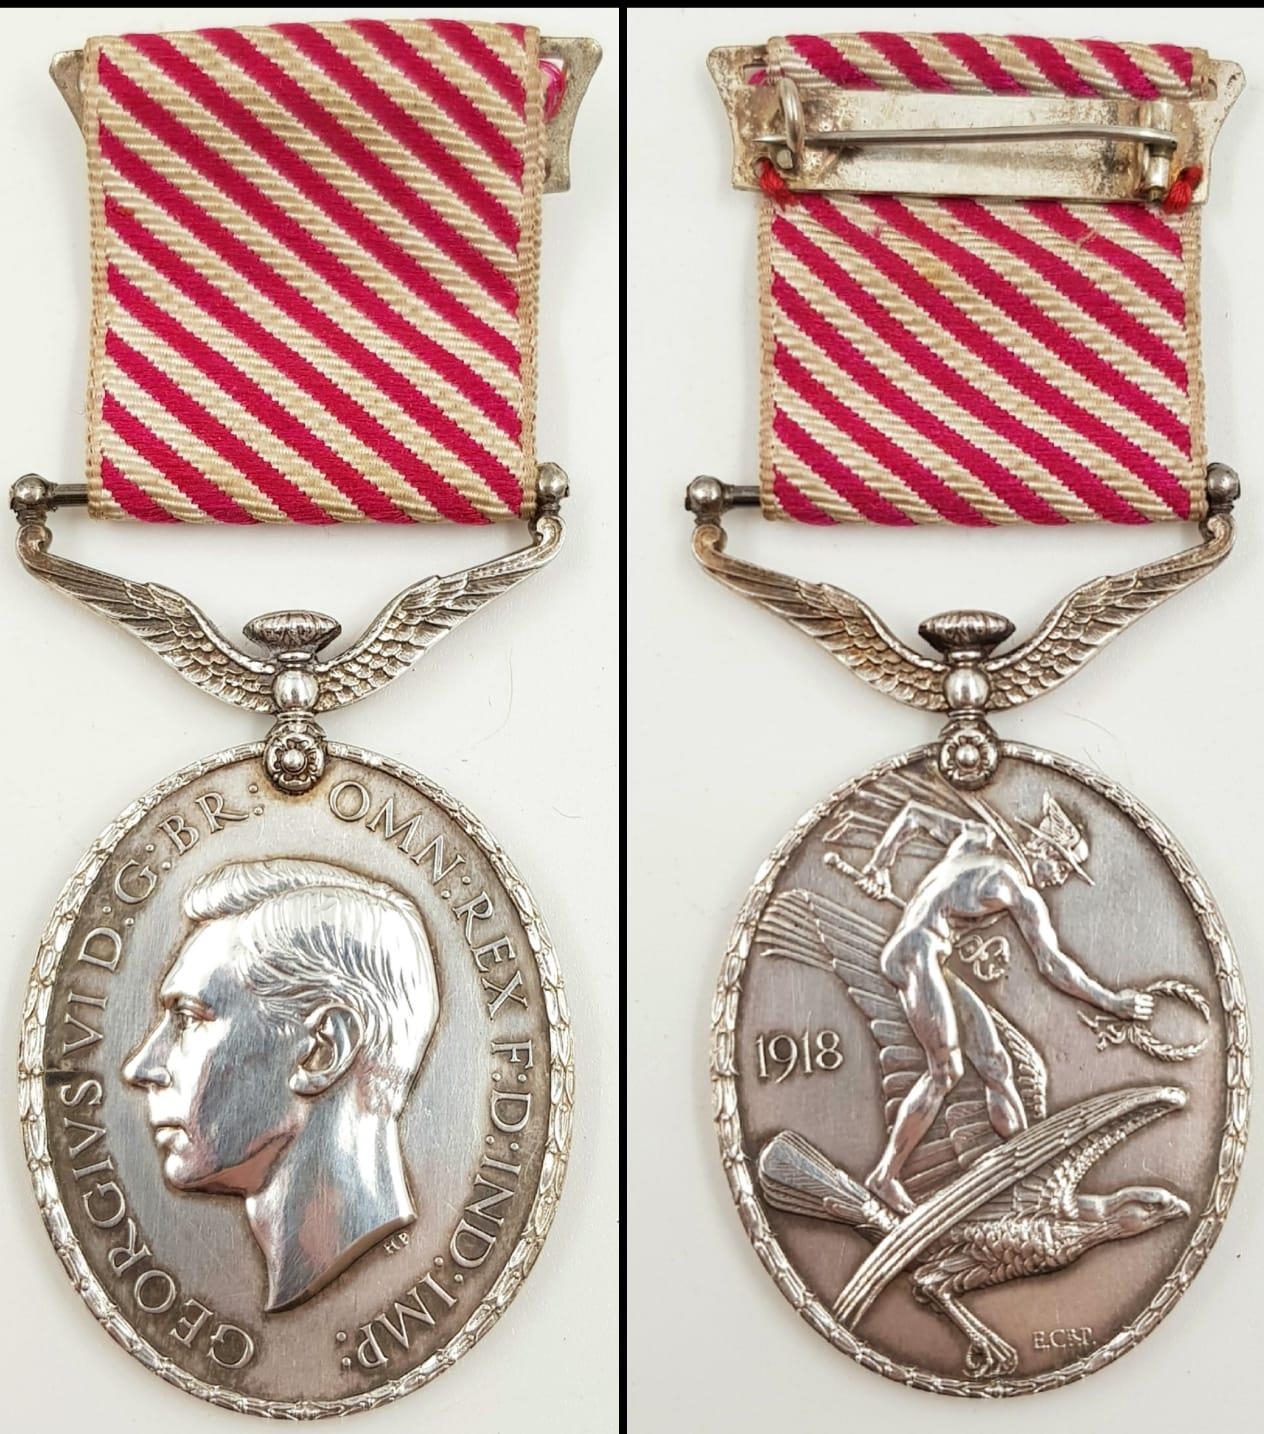 A Silver George VI Air Force Medal (AFM) Awarded to Sergeant Francis John Ruoff, of the RAF in 1942.